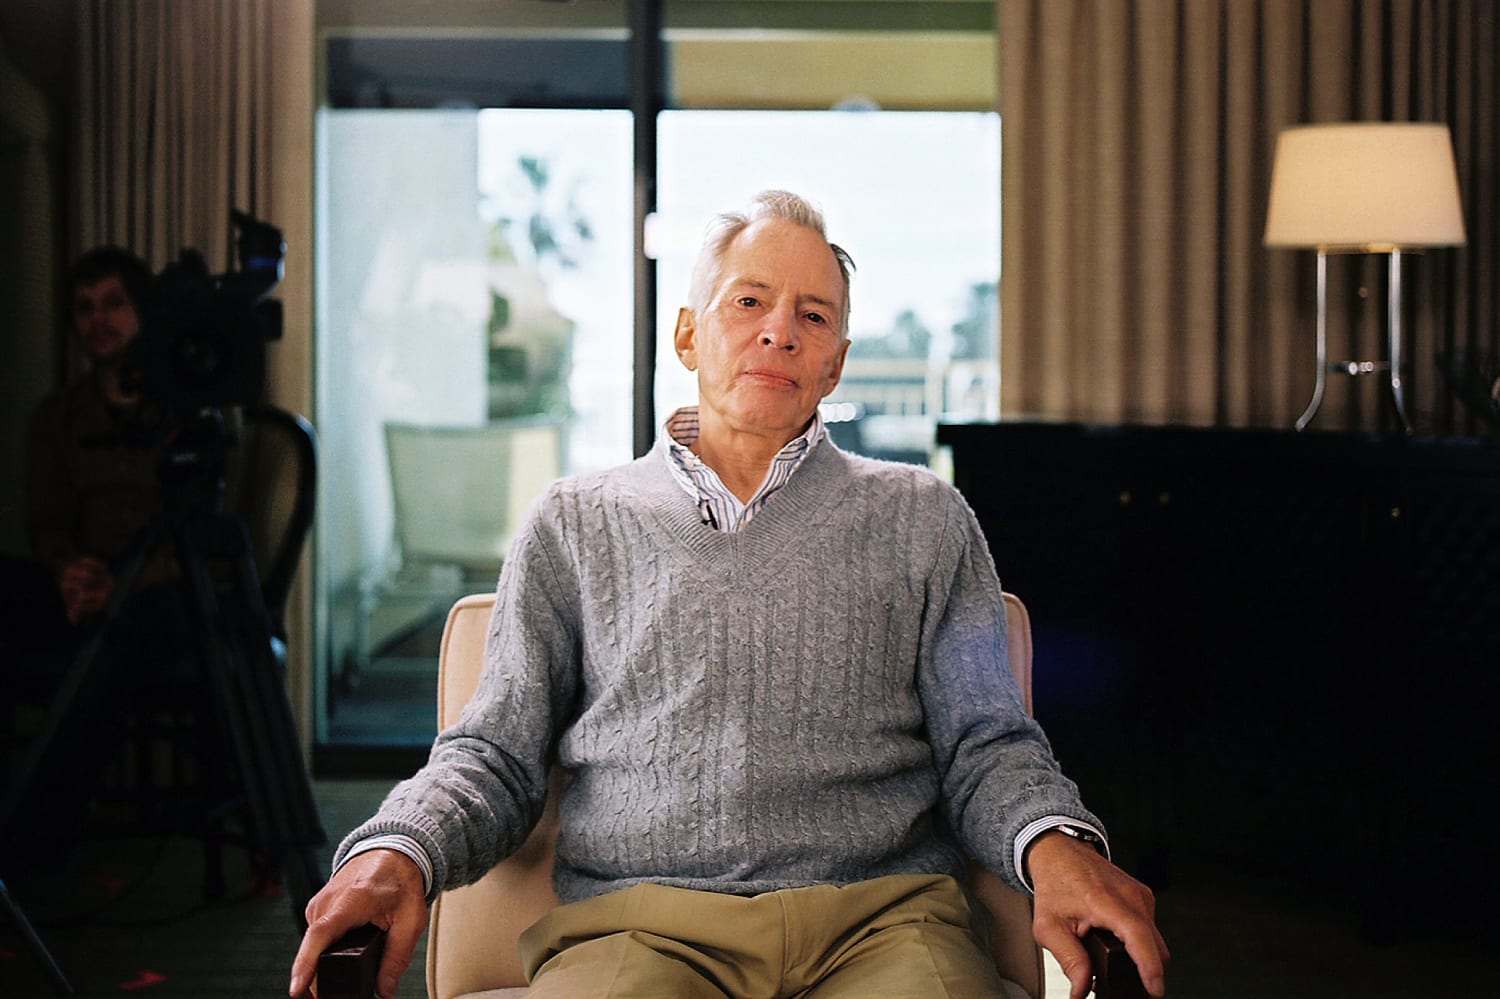 Robert Durst, real estate heir and convicted murderer, dies at 78